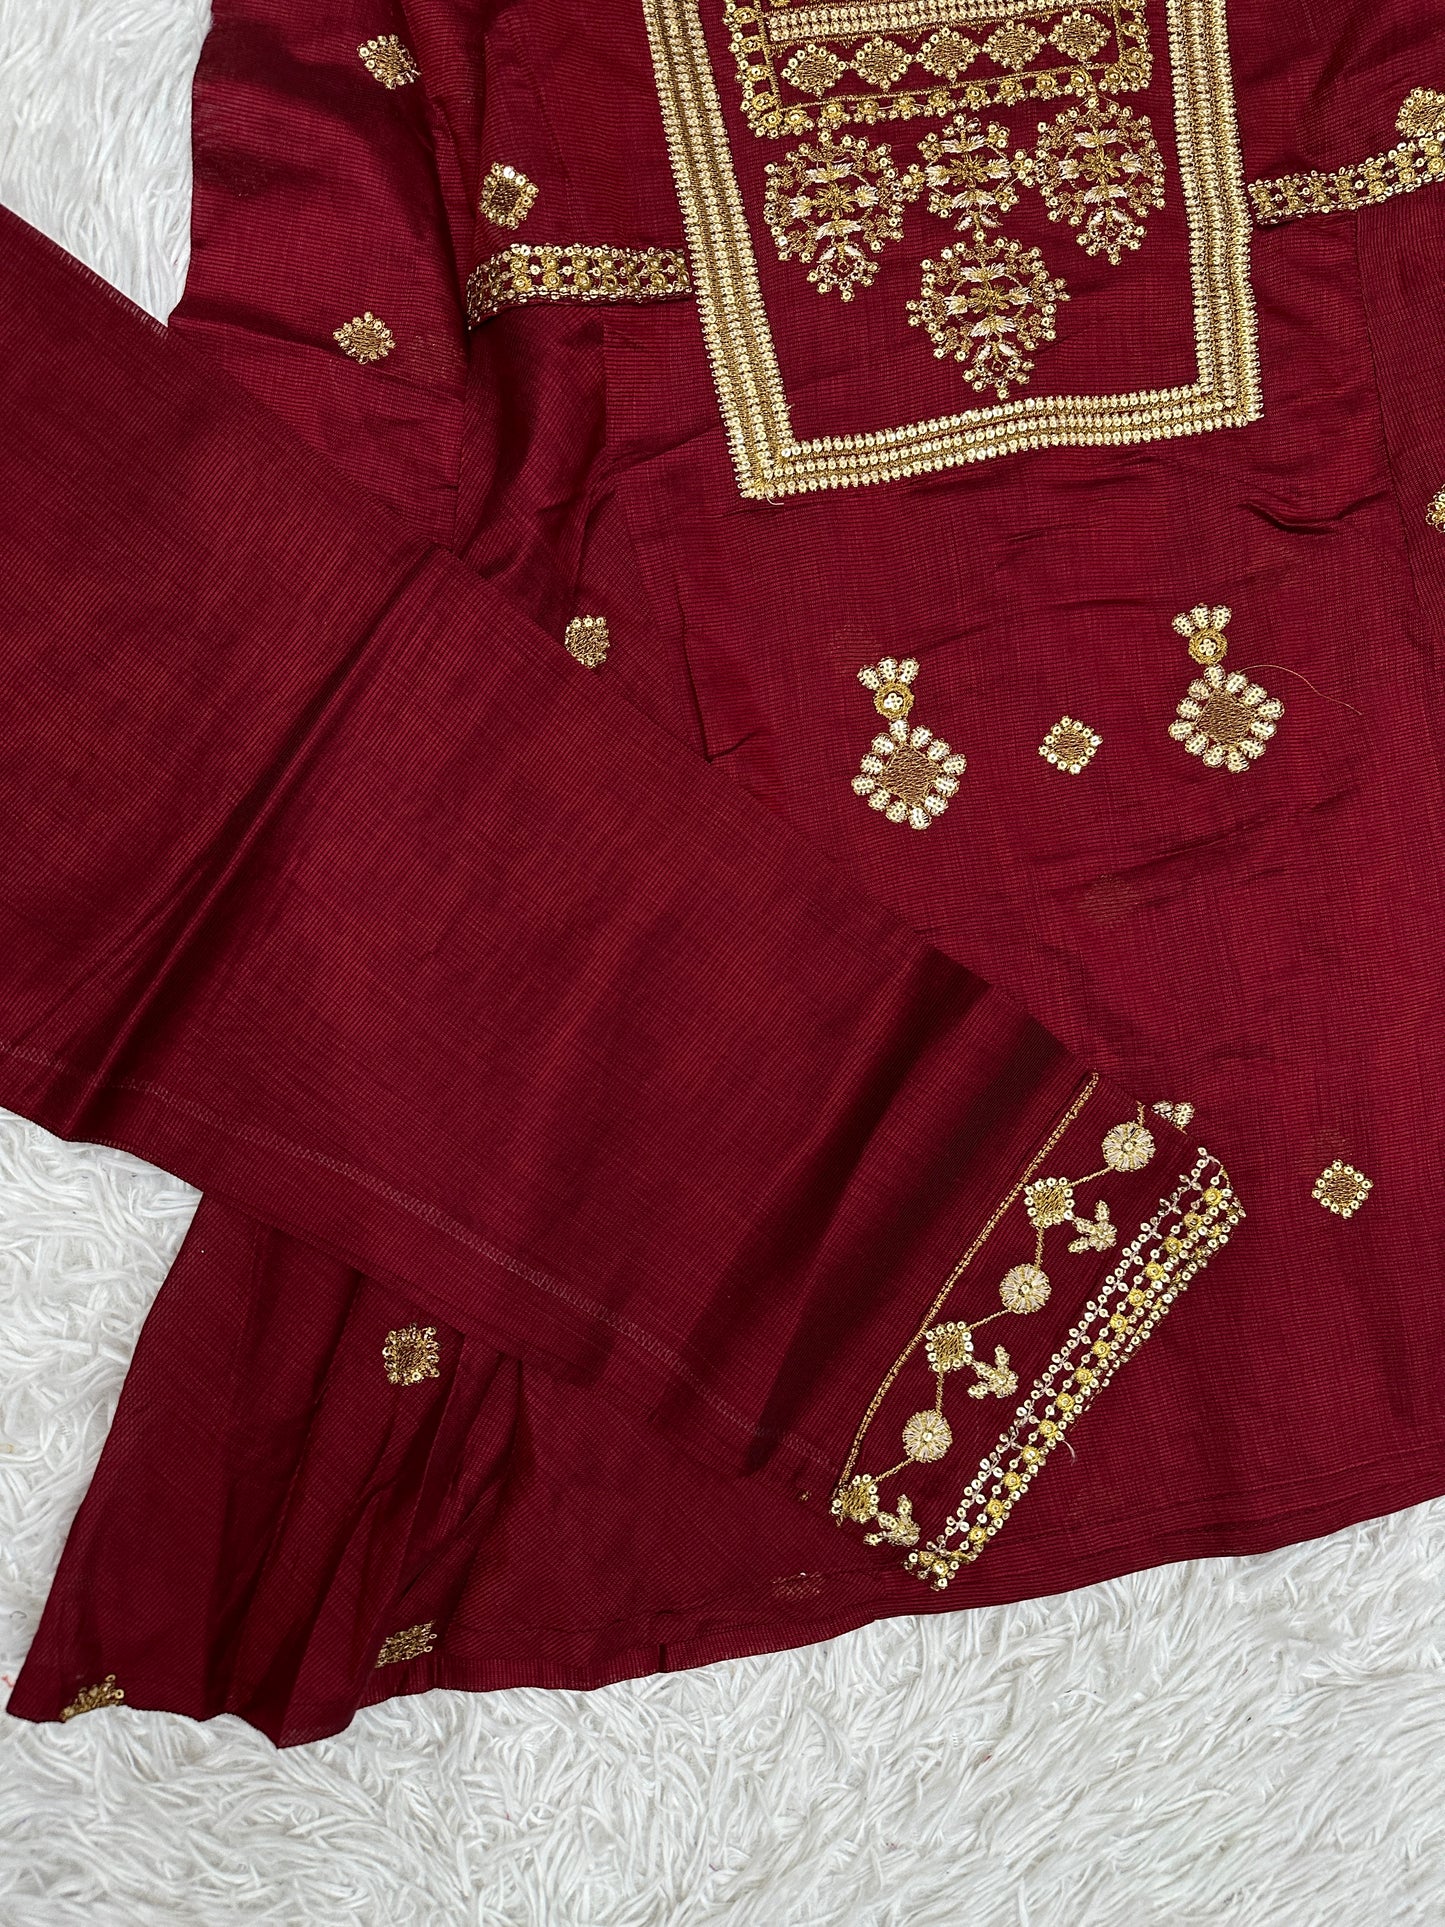 Girl’s Festive Maroon Cotton Outfit 7+